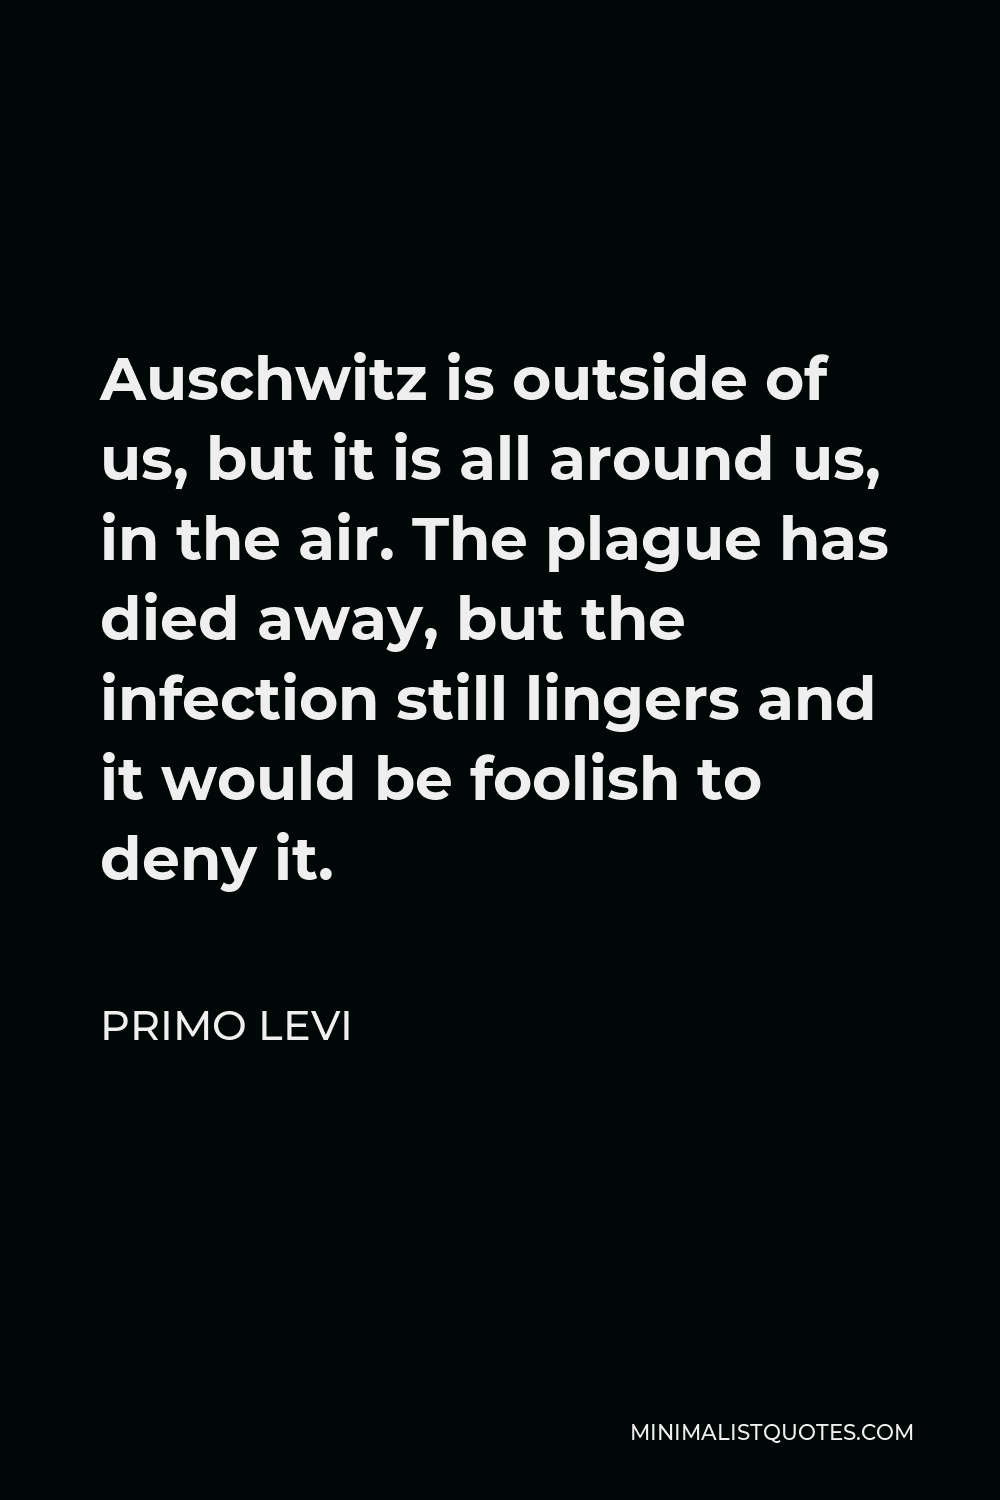 Primo Levi Quote - Auschwitz is outside of us, but it is all around us, in the air. The plague has died away, but the infection still lingers and it would be foolish to deny it.